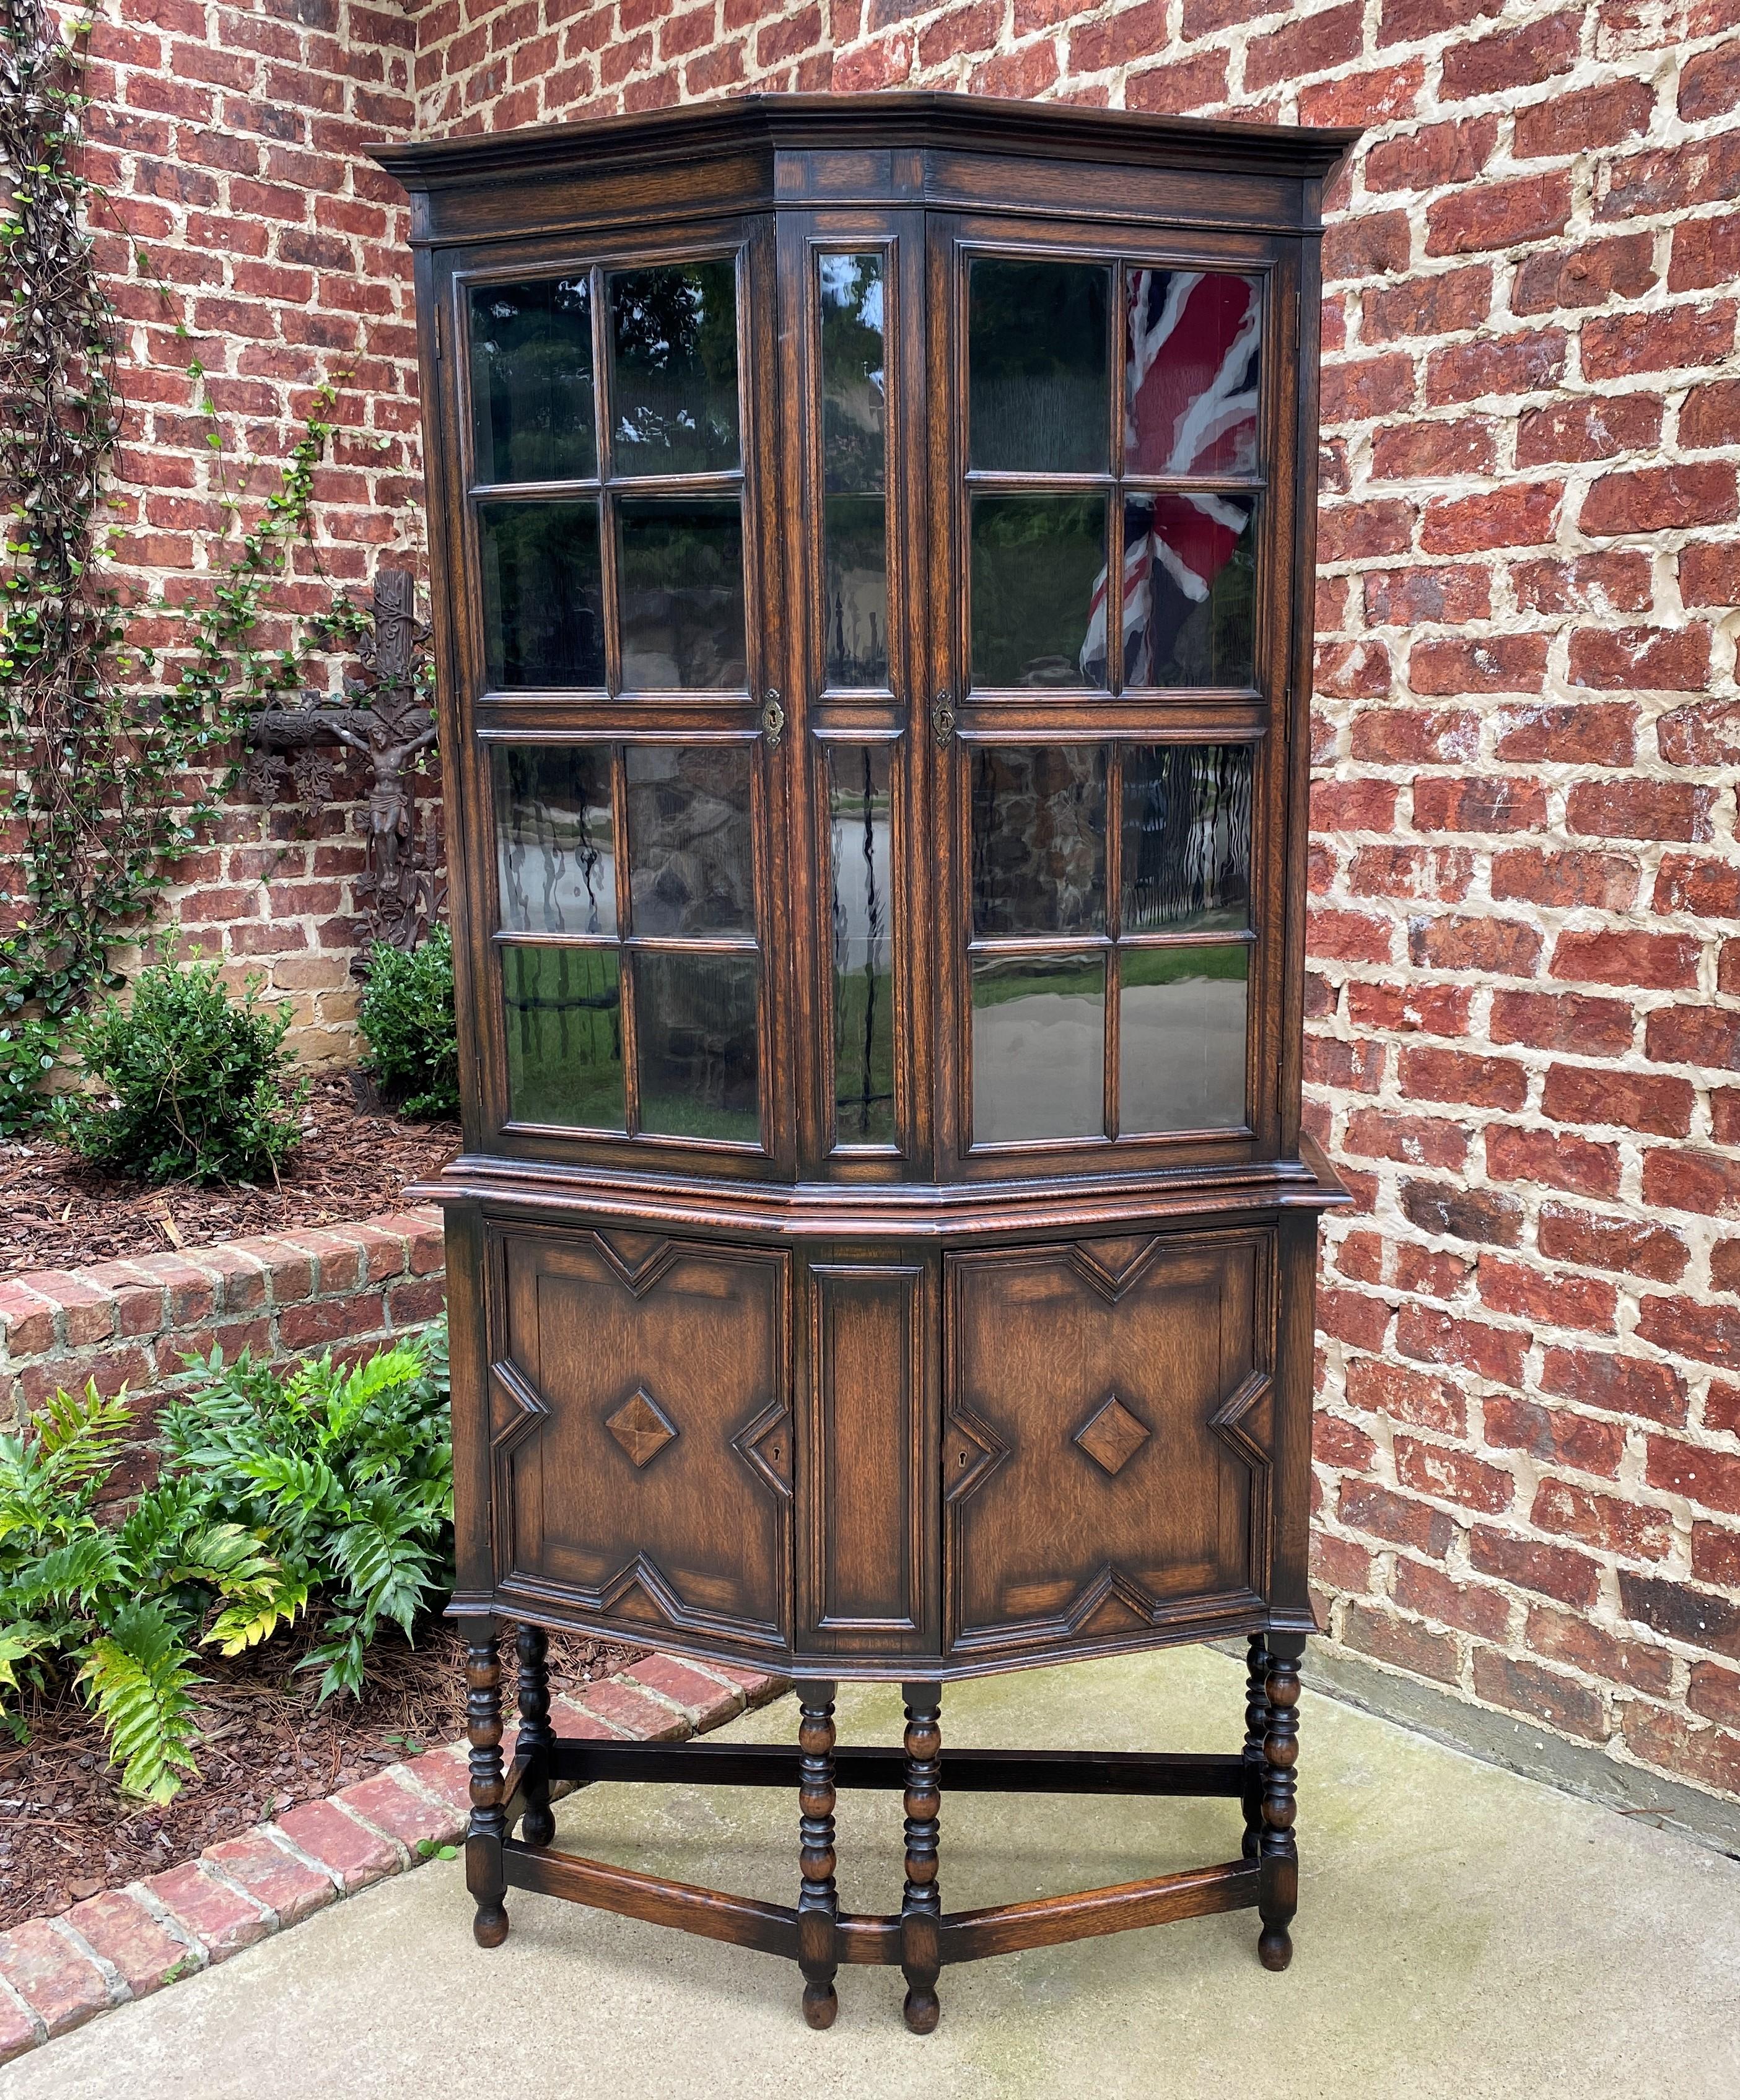 Gorgeous Antique English Oak Jacobean or Tudor Style Double-Door Bookcase, Display/China Cabinet, or Vitrine~~c. 1900 

Highly sought after Jacobean style with geometric carvings and trim~~original 